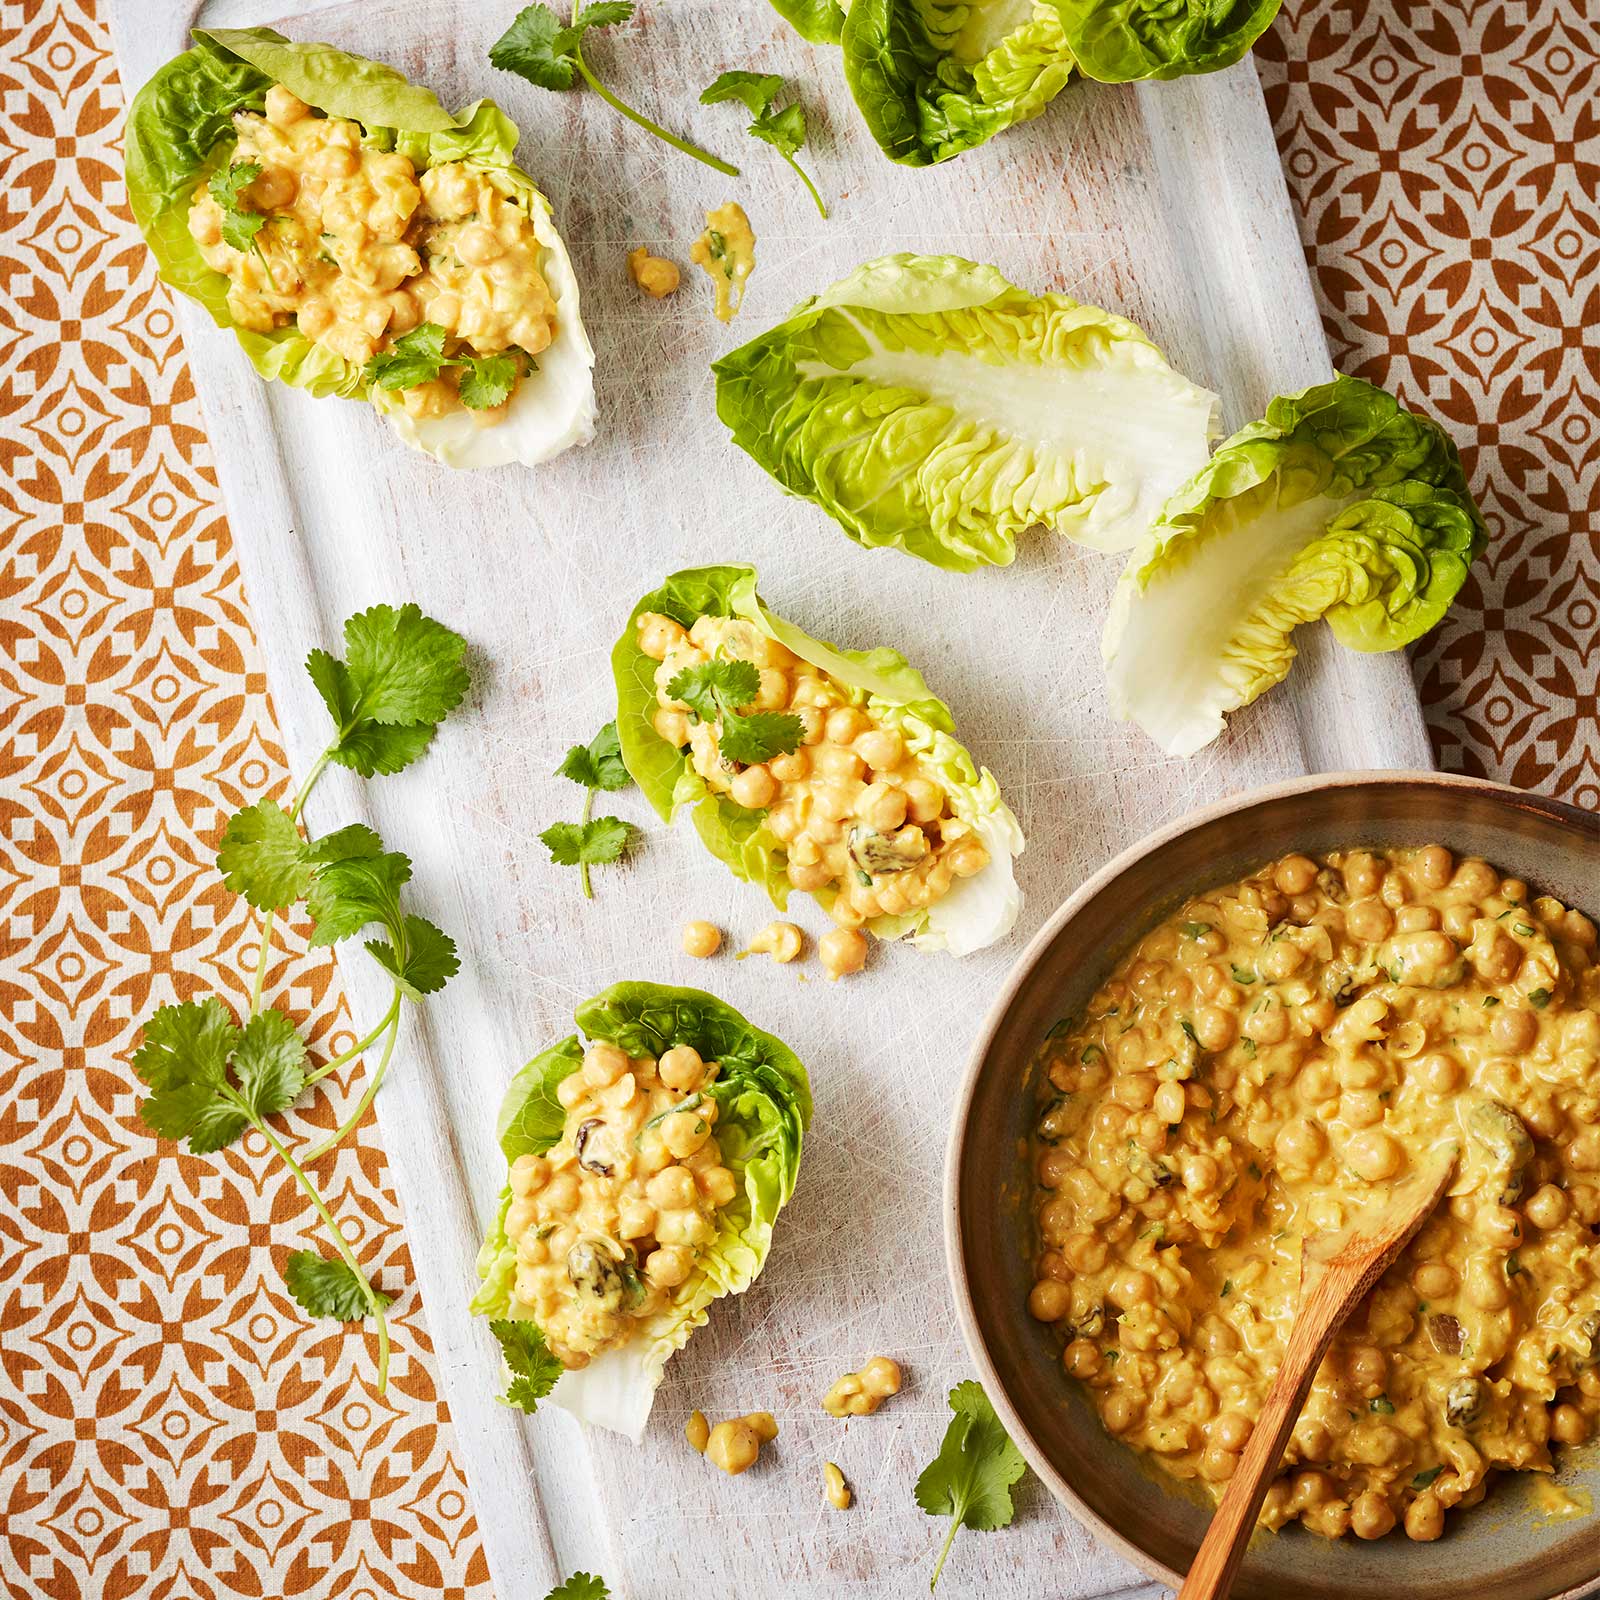 Coronation chickpea salad is in a saucepan with a wooden spoon. It sits on a white serving platter with lettuce leaves, some are filled with the chickpea mixture.